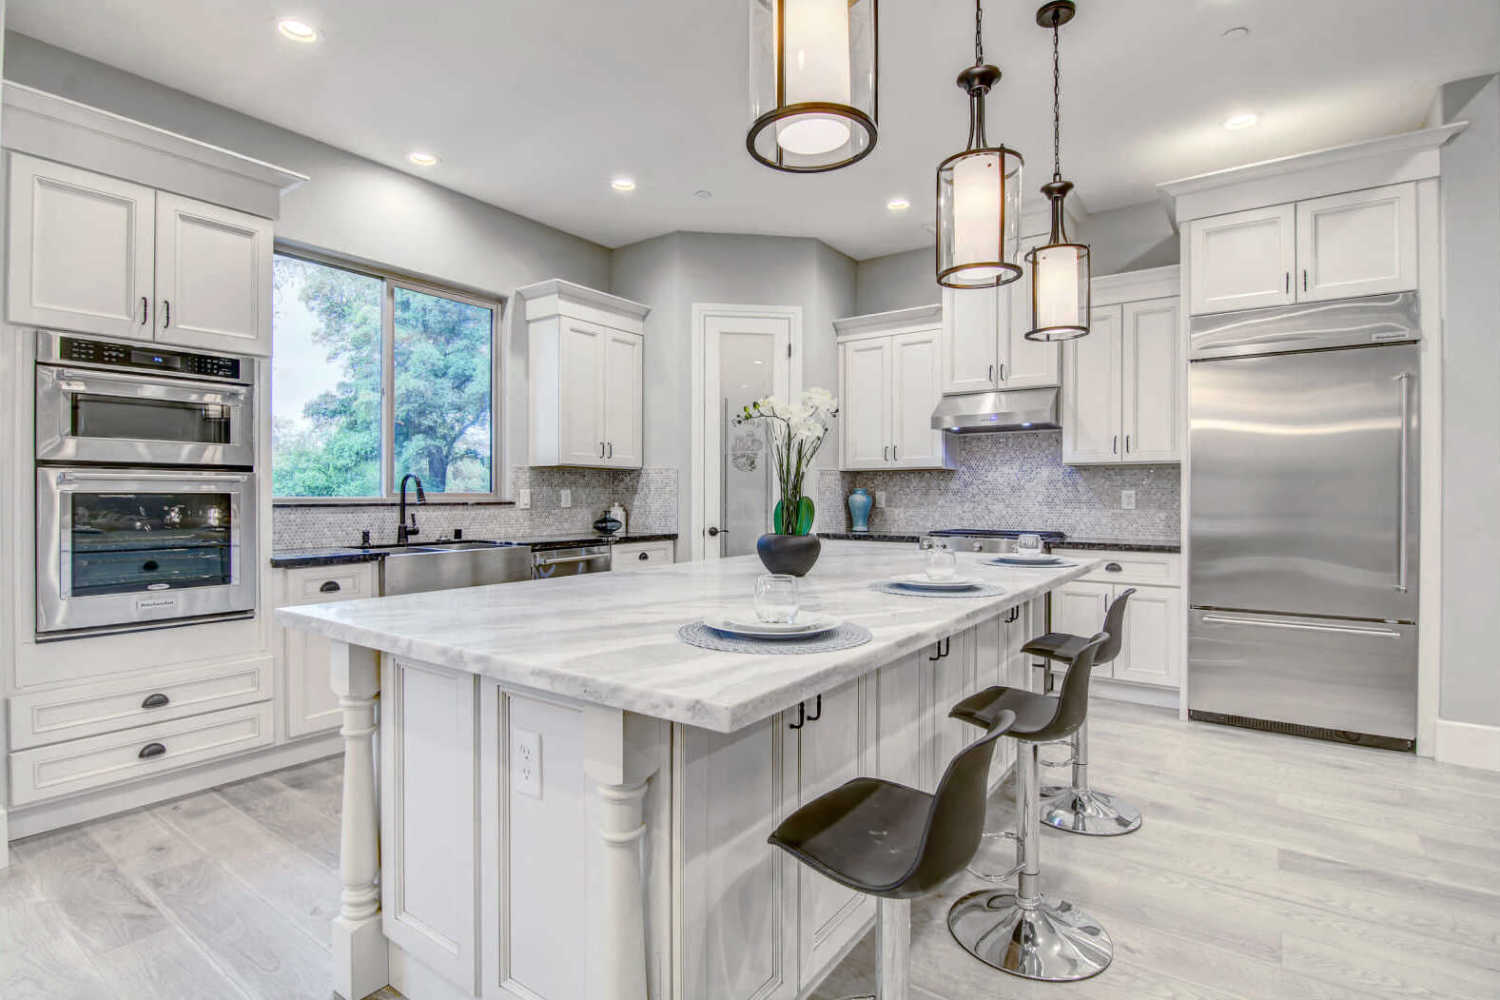 The 7 2019 Kitchen Renovations Trends You Don't Want to Miss